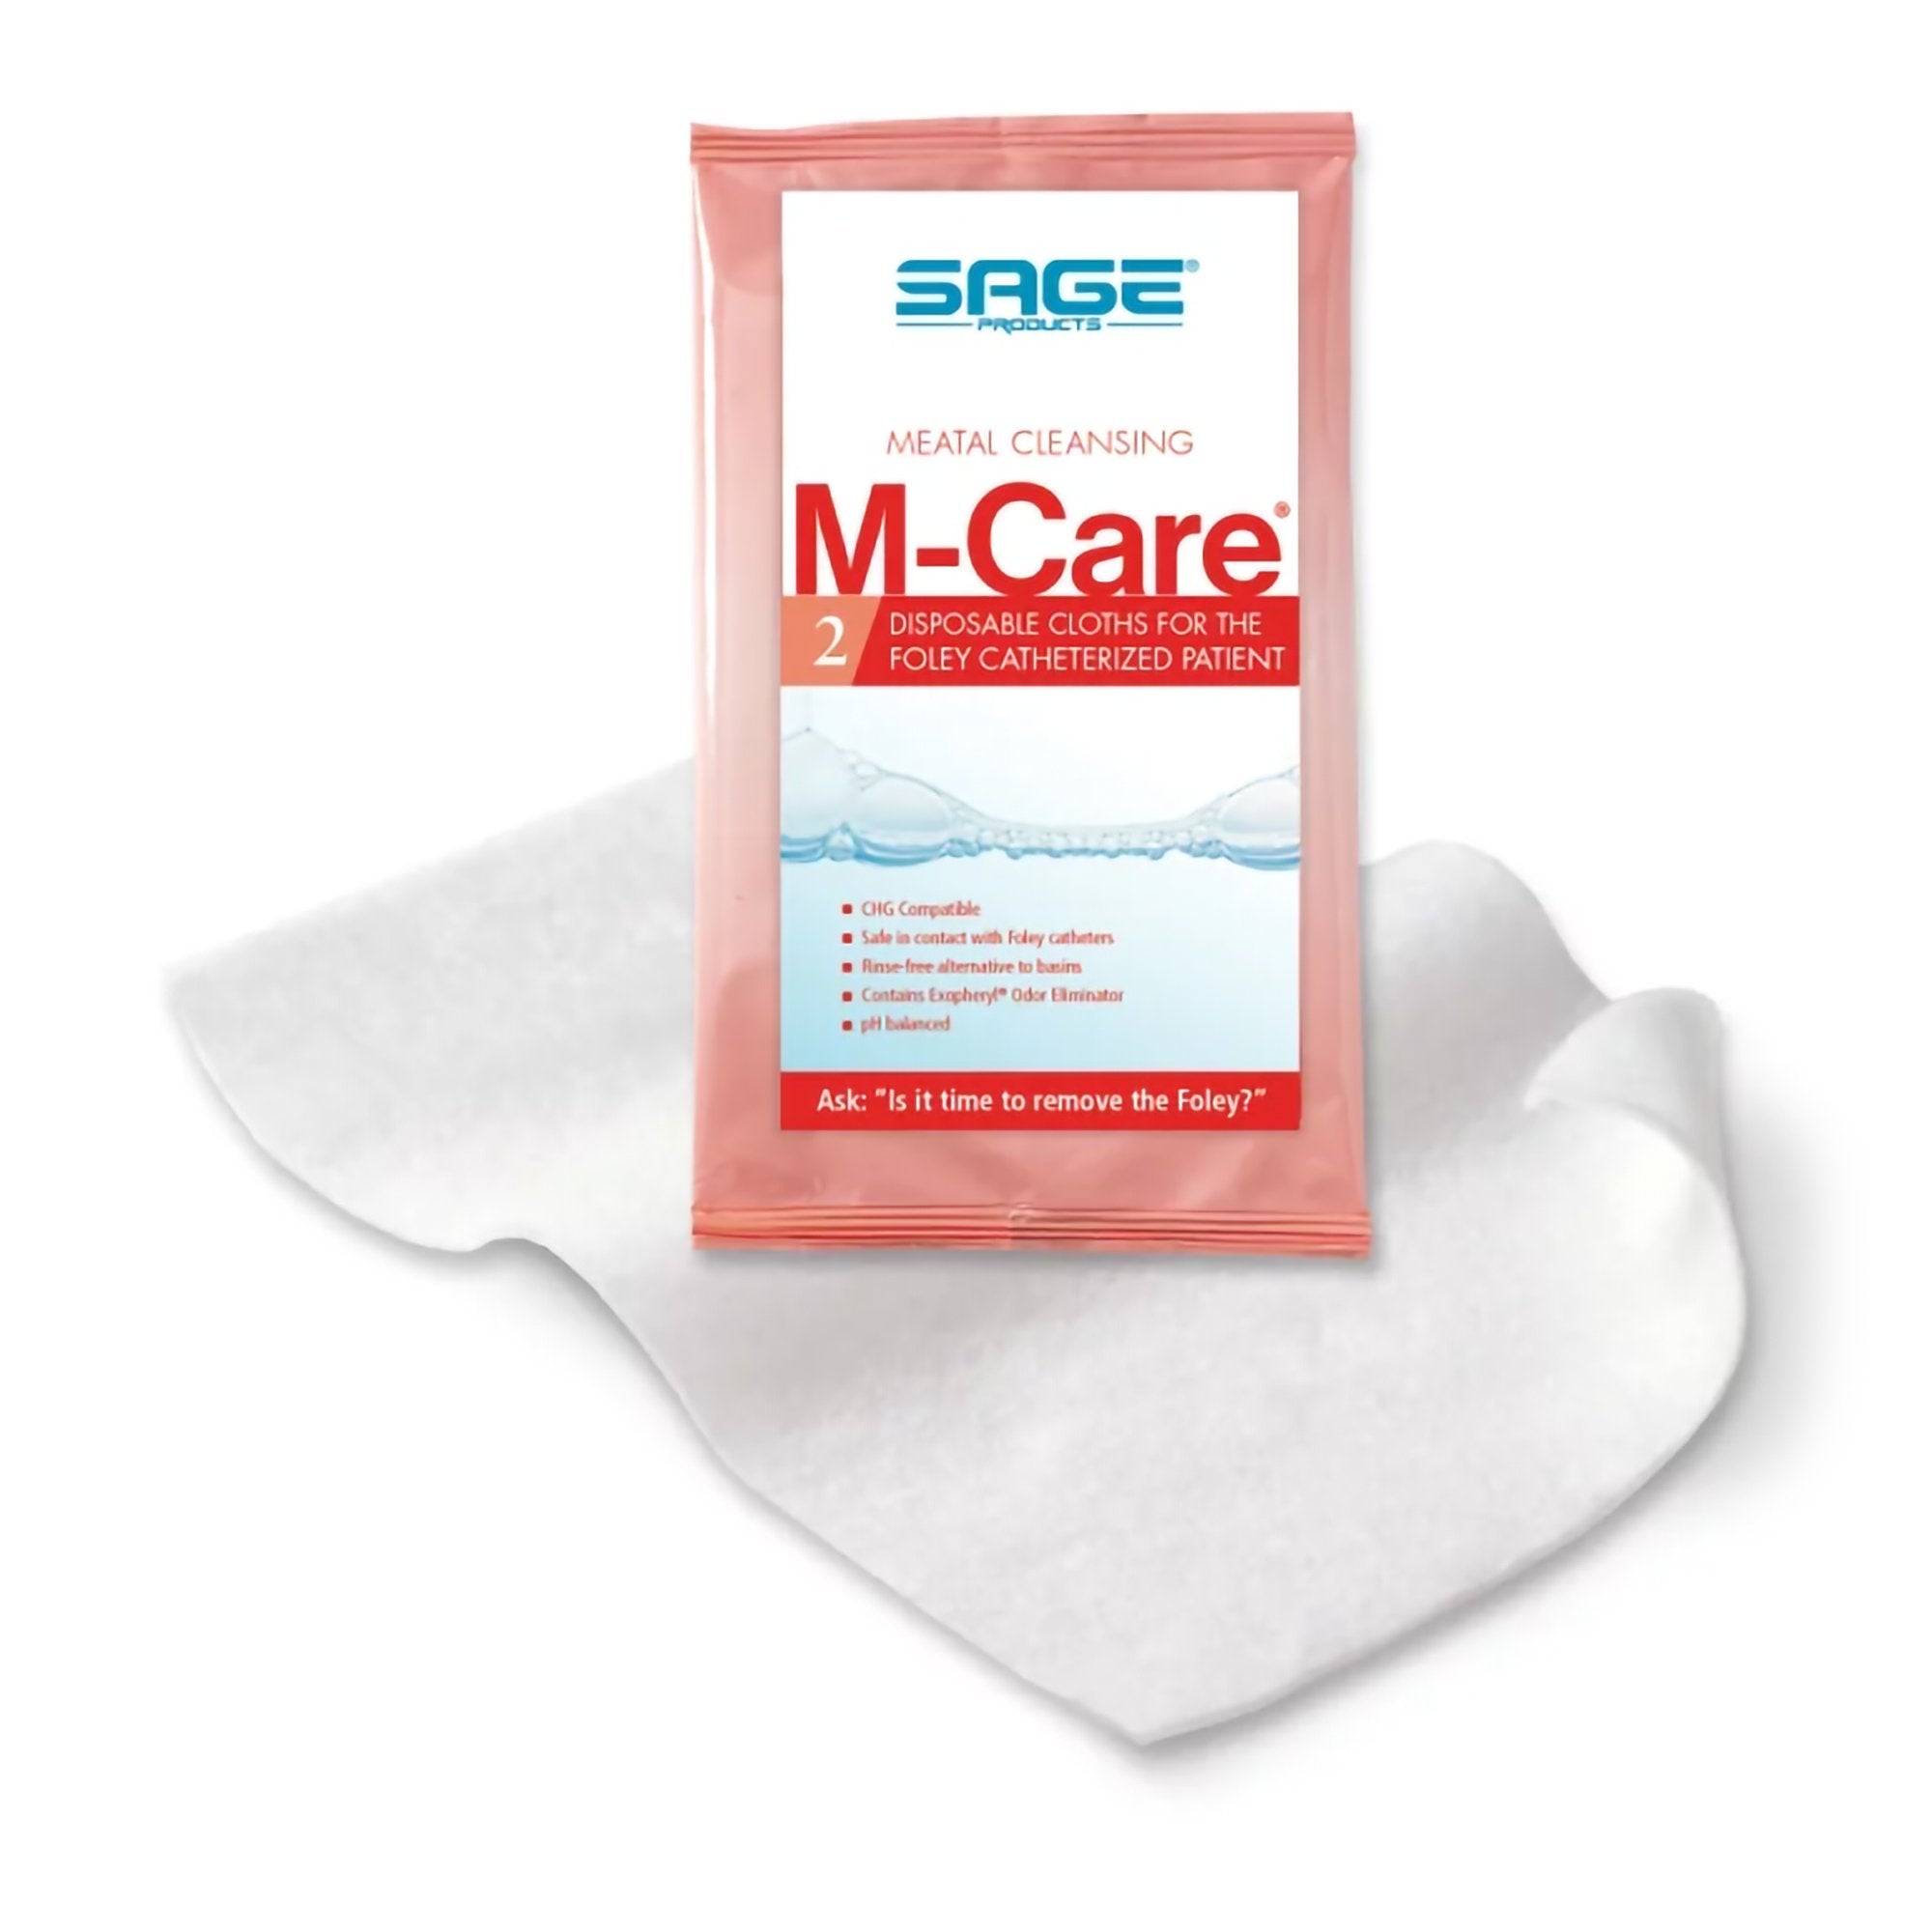 Personal Cleansing Wipe M-Care™ Meatal Soft Pack Scented 2 Count